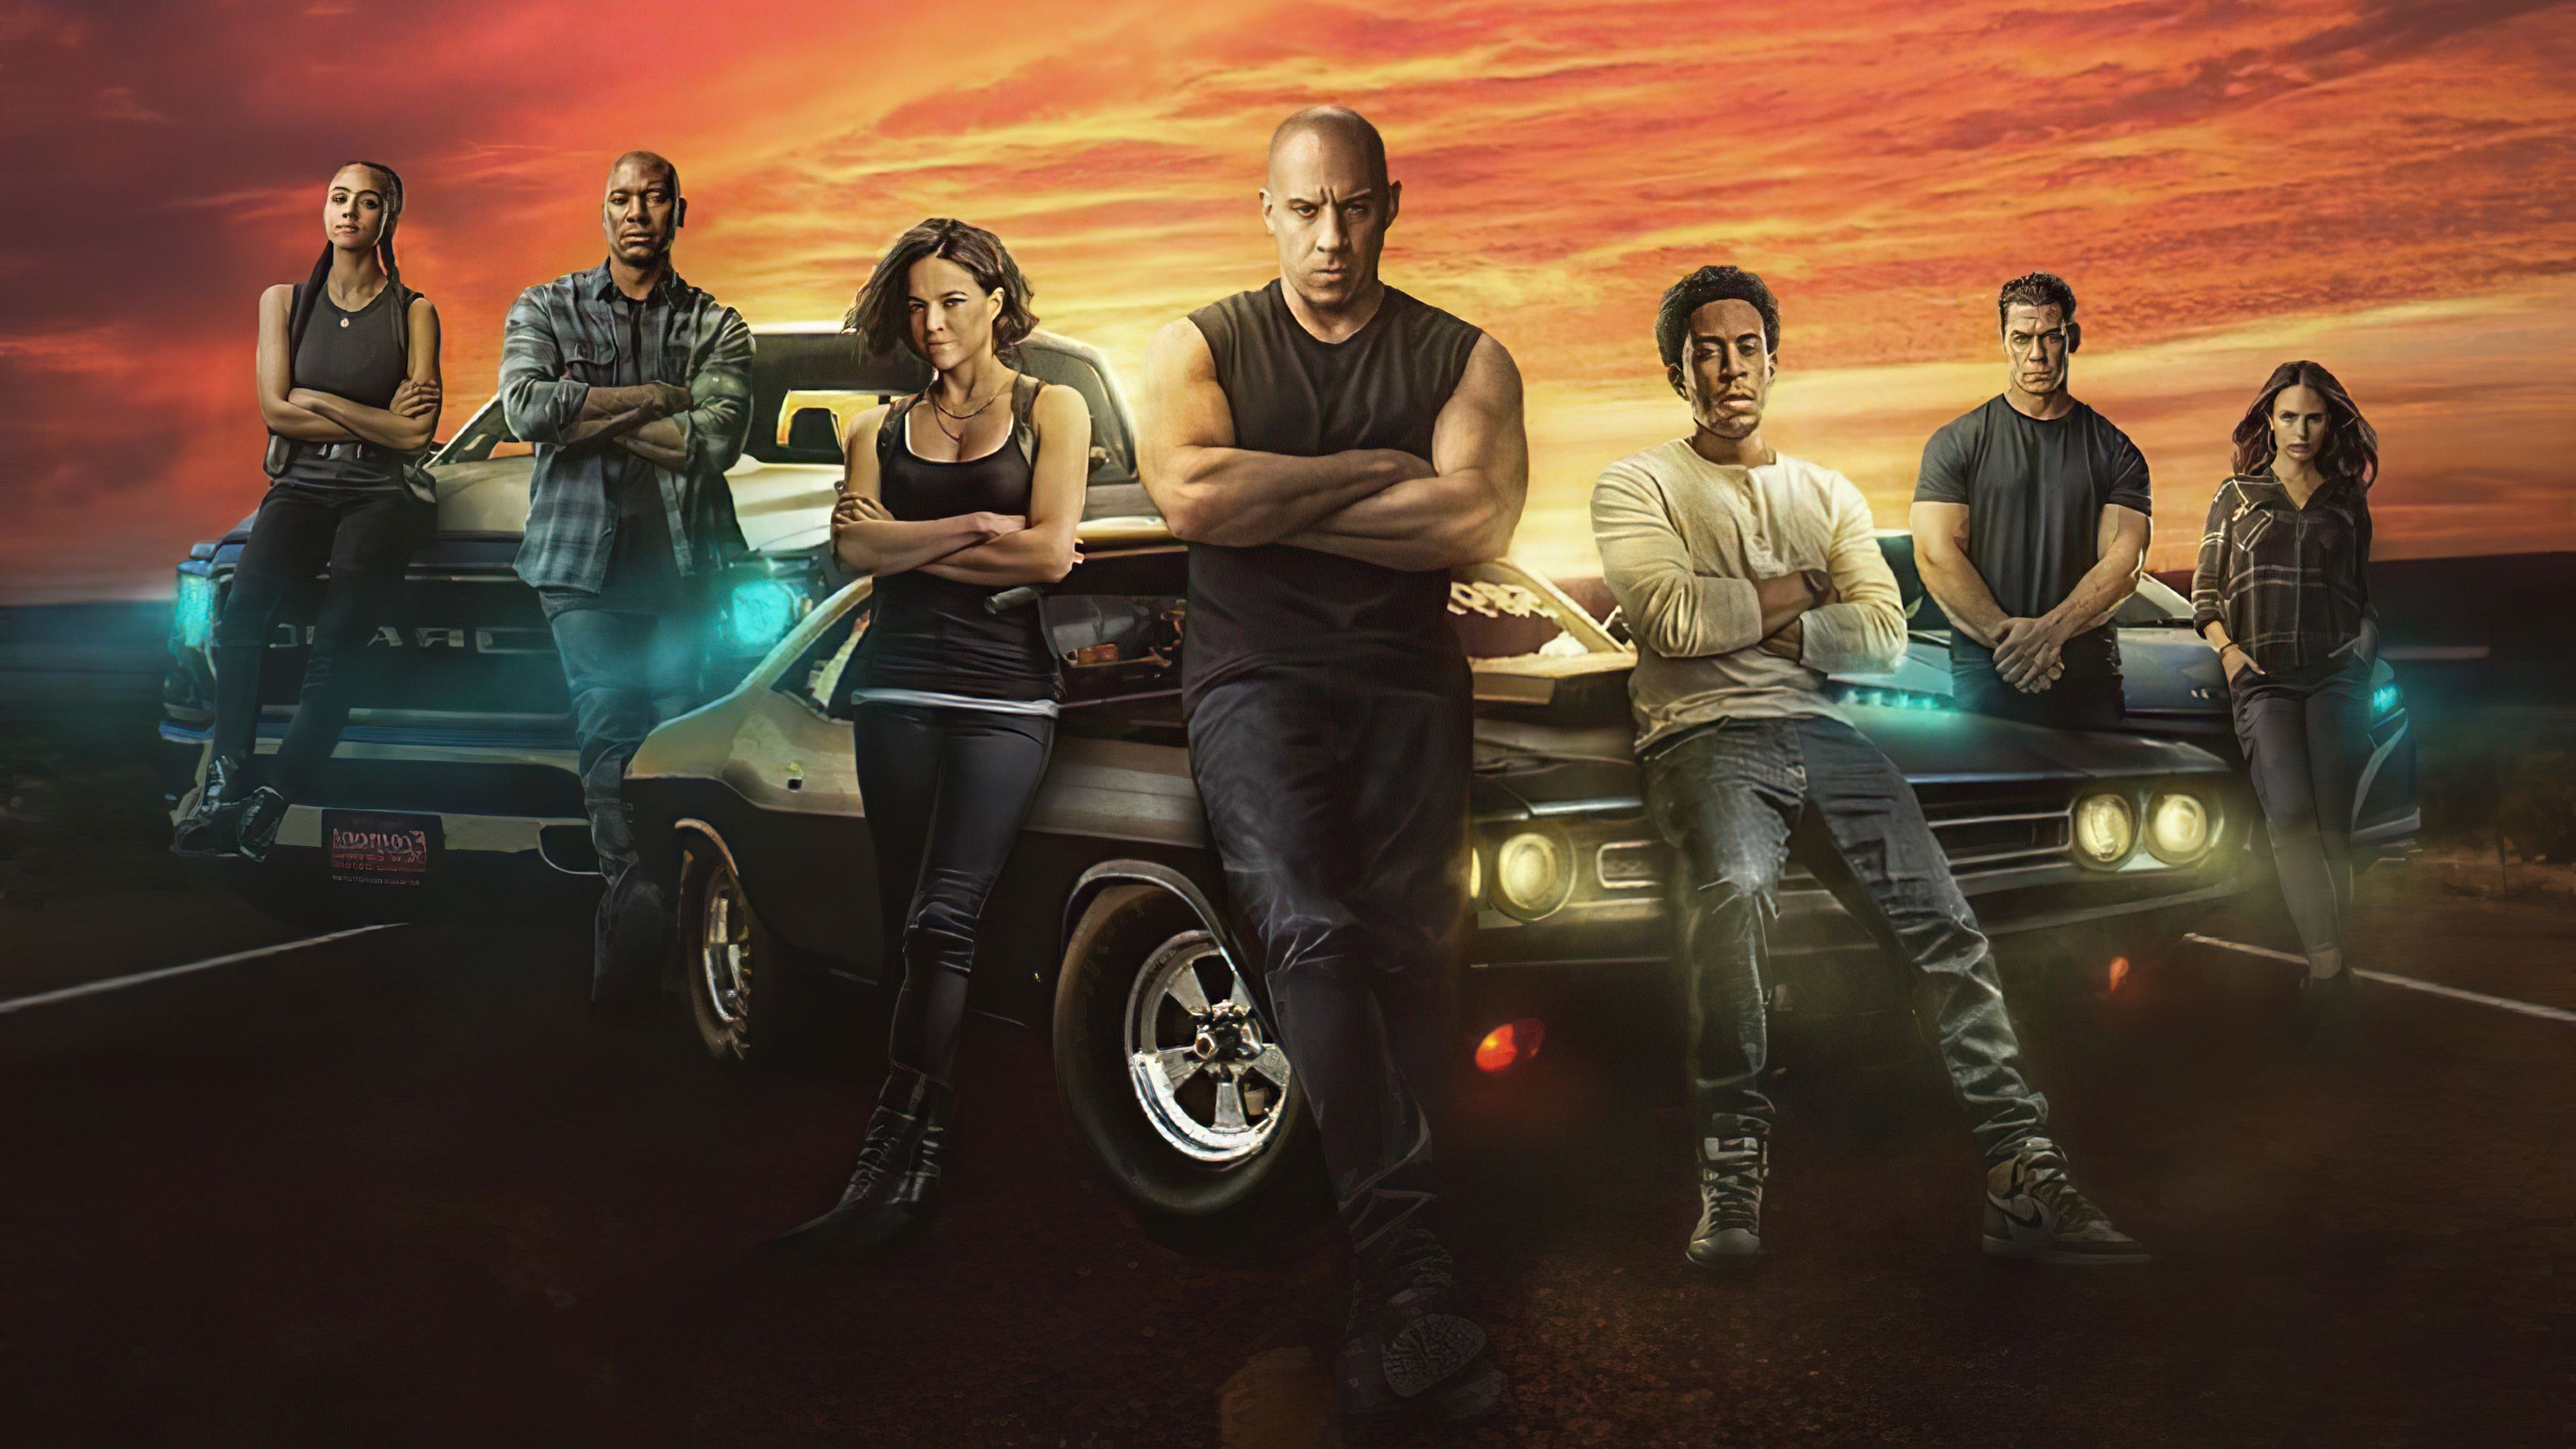 Tons of awesome 4k Fast and Furious computer wallpapers to download for fre...